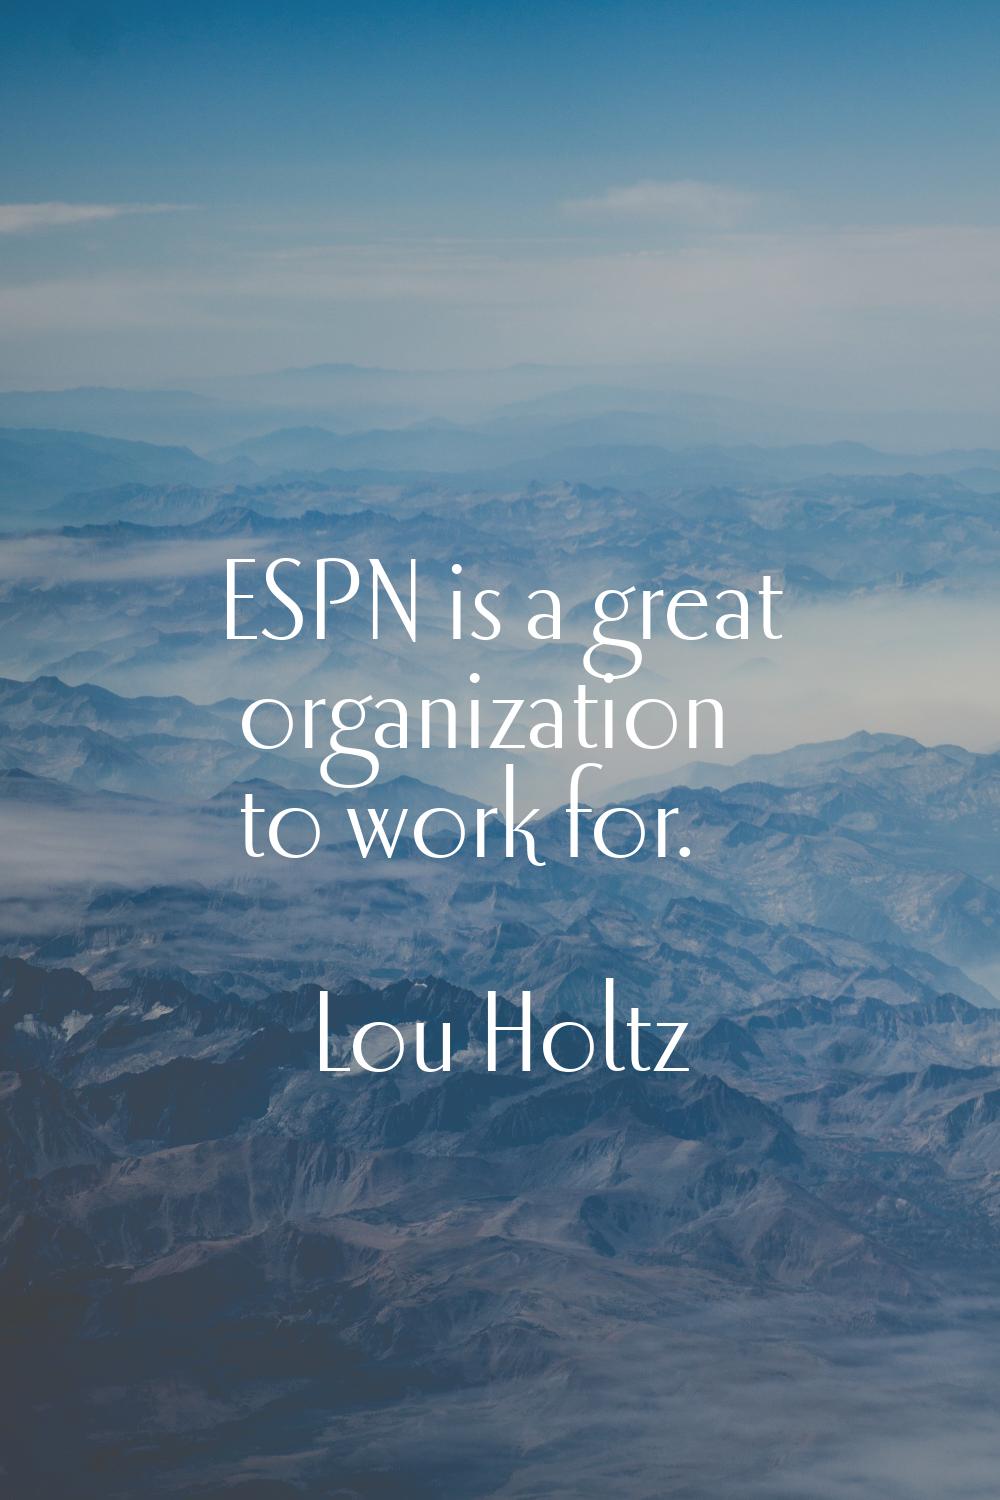 ESPN is a great organization to work for.